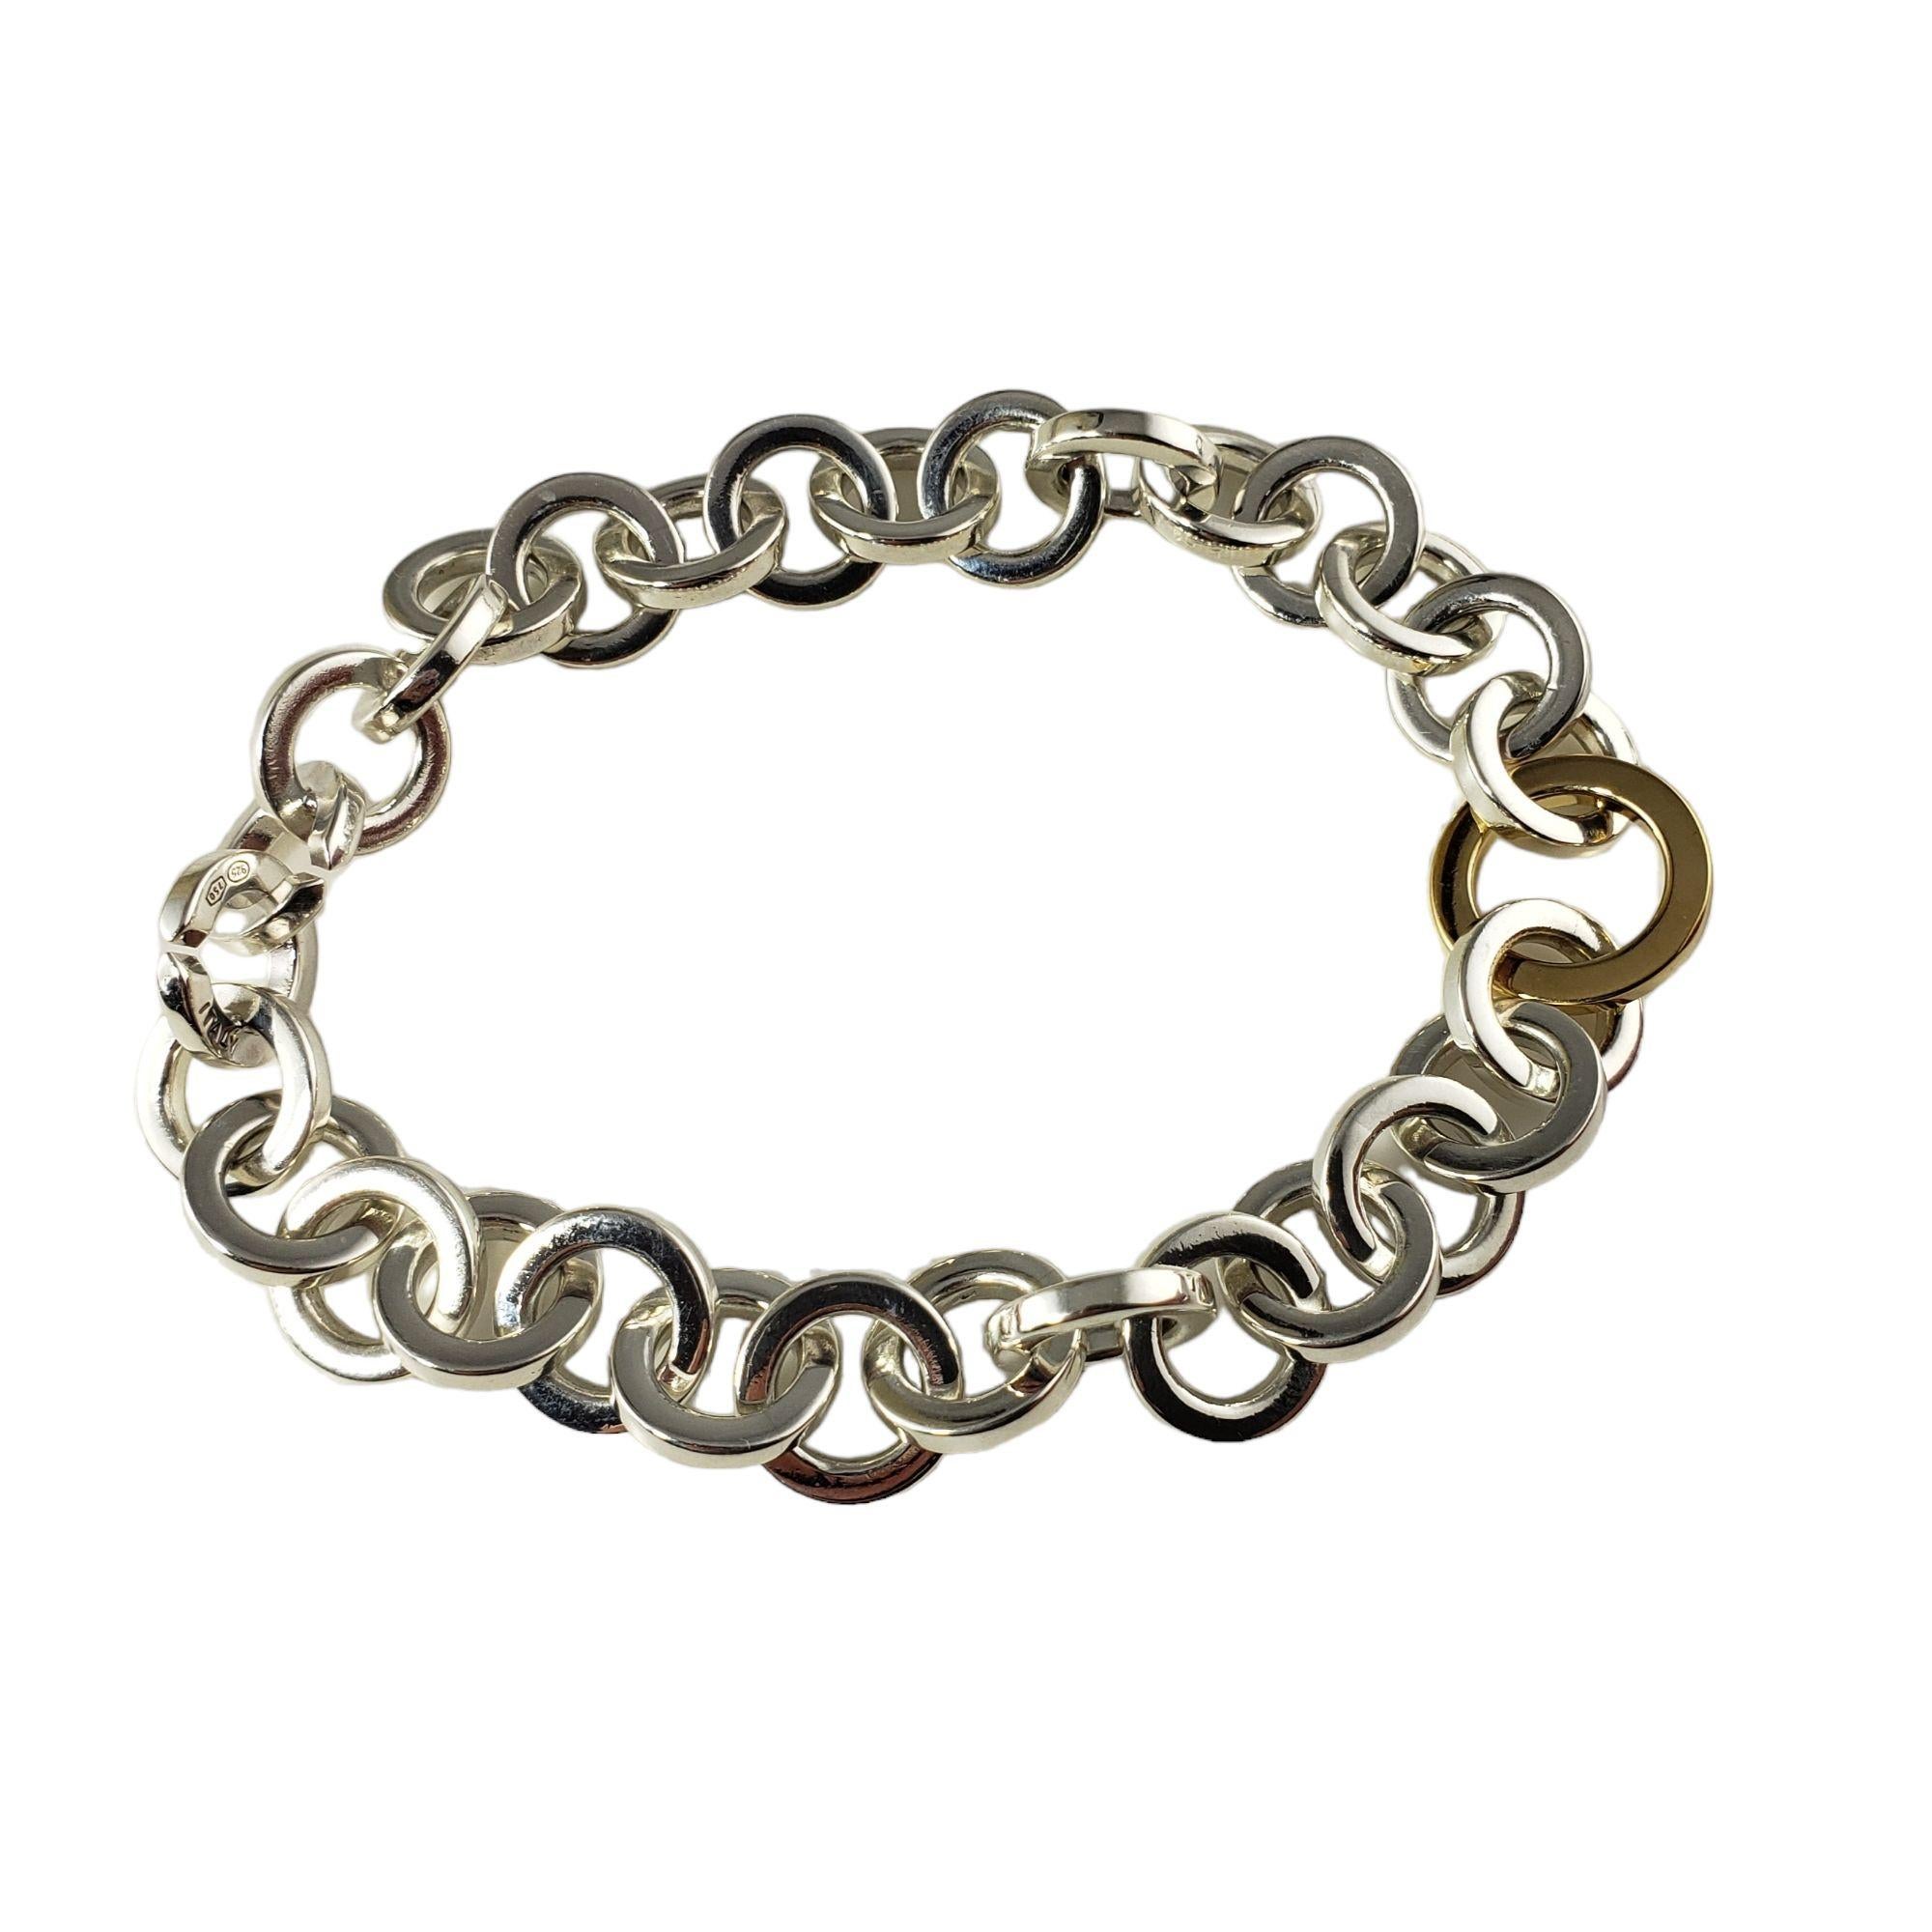 Vintage Tiffany & Co. Sterling Silver and 18 Karat Yellow Gold Link Bracelet-

This lovely circle link bracelet is crafted in beautifully detailed sterling silver and 18K yellow gold. Width: 15 mm.

Size: 8 inches

Weight: 40.1 gr./ 25.7